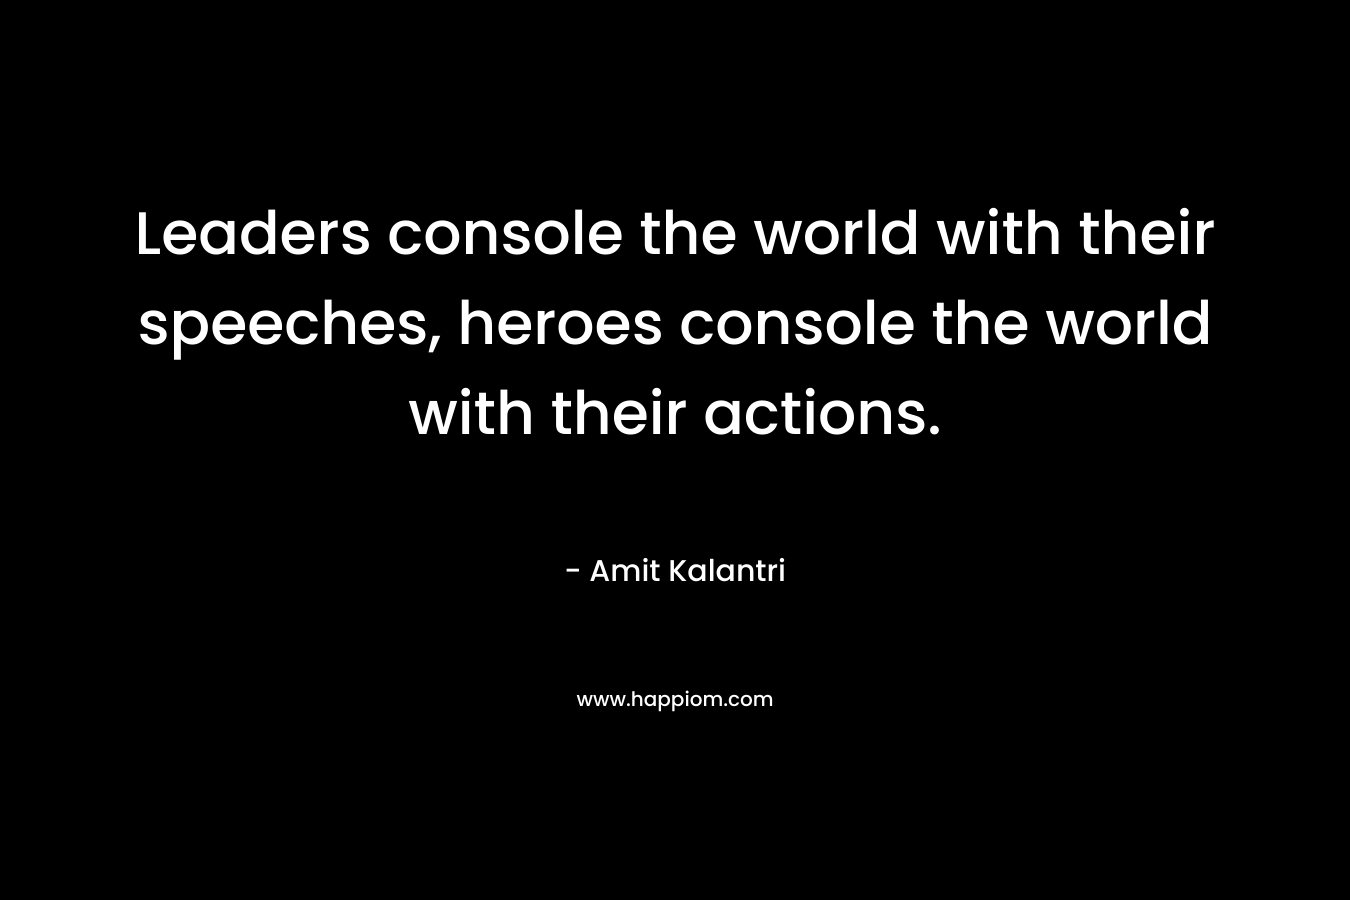 Leaders console the world with their speeches, heroes console the world with their actions.